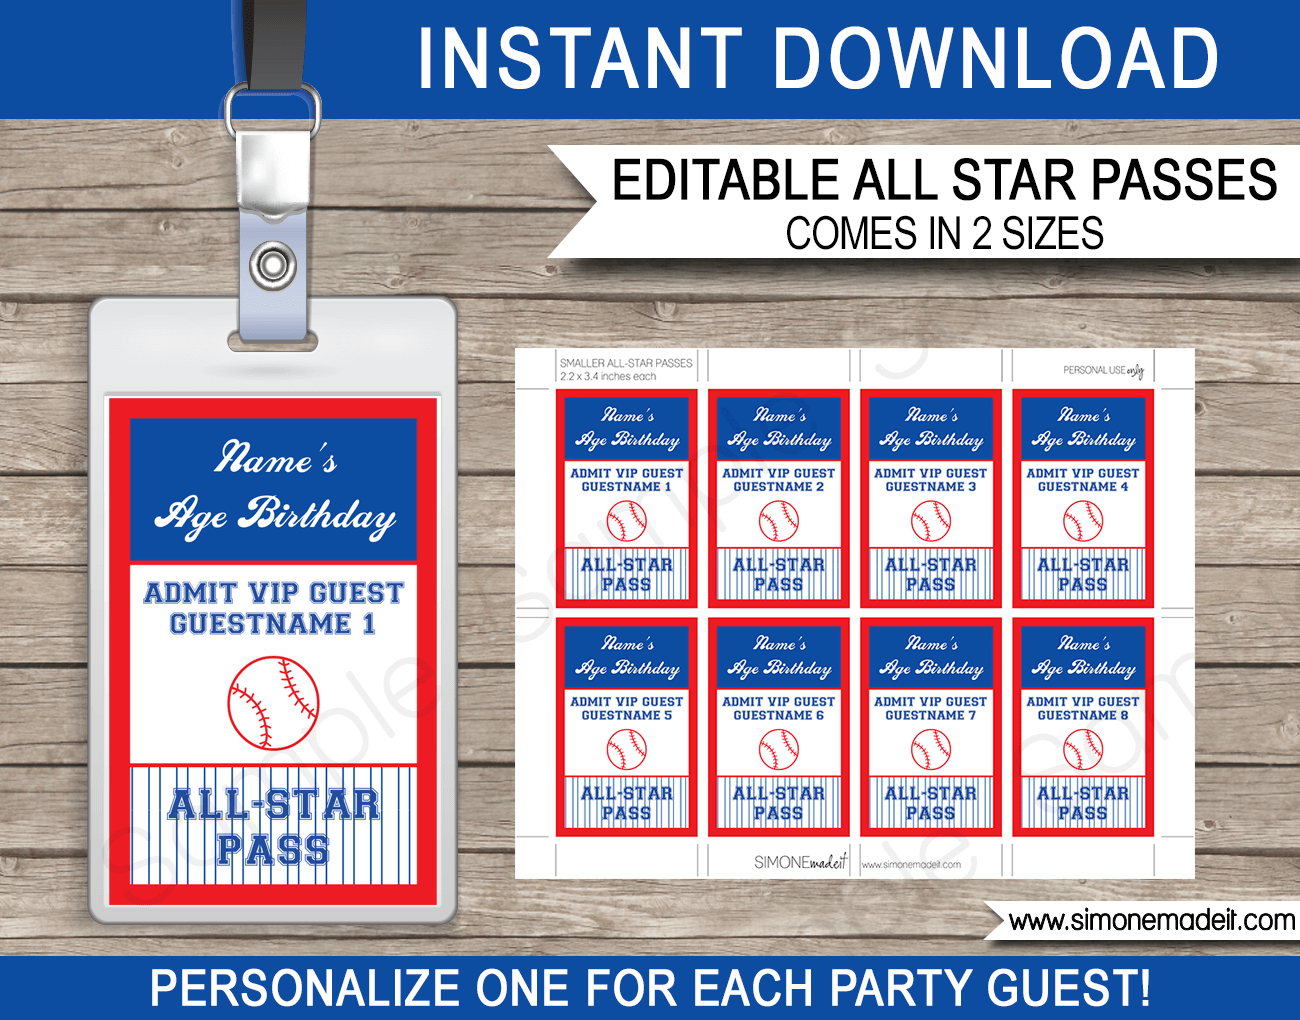 Baseball Party All Star VIP Passes | Printable Inserts | Party Favors | Birthday Party | Editable DIY Template | $3.50 INSTANT DOWNLOAD via SIMONEmadeit.com